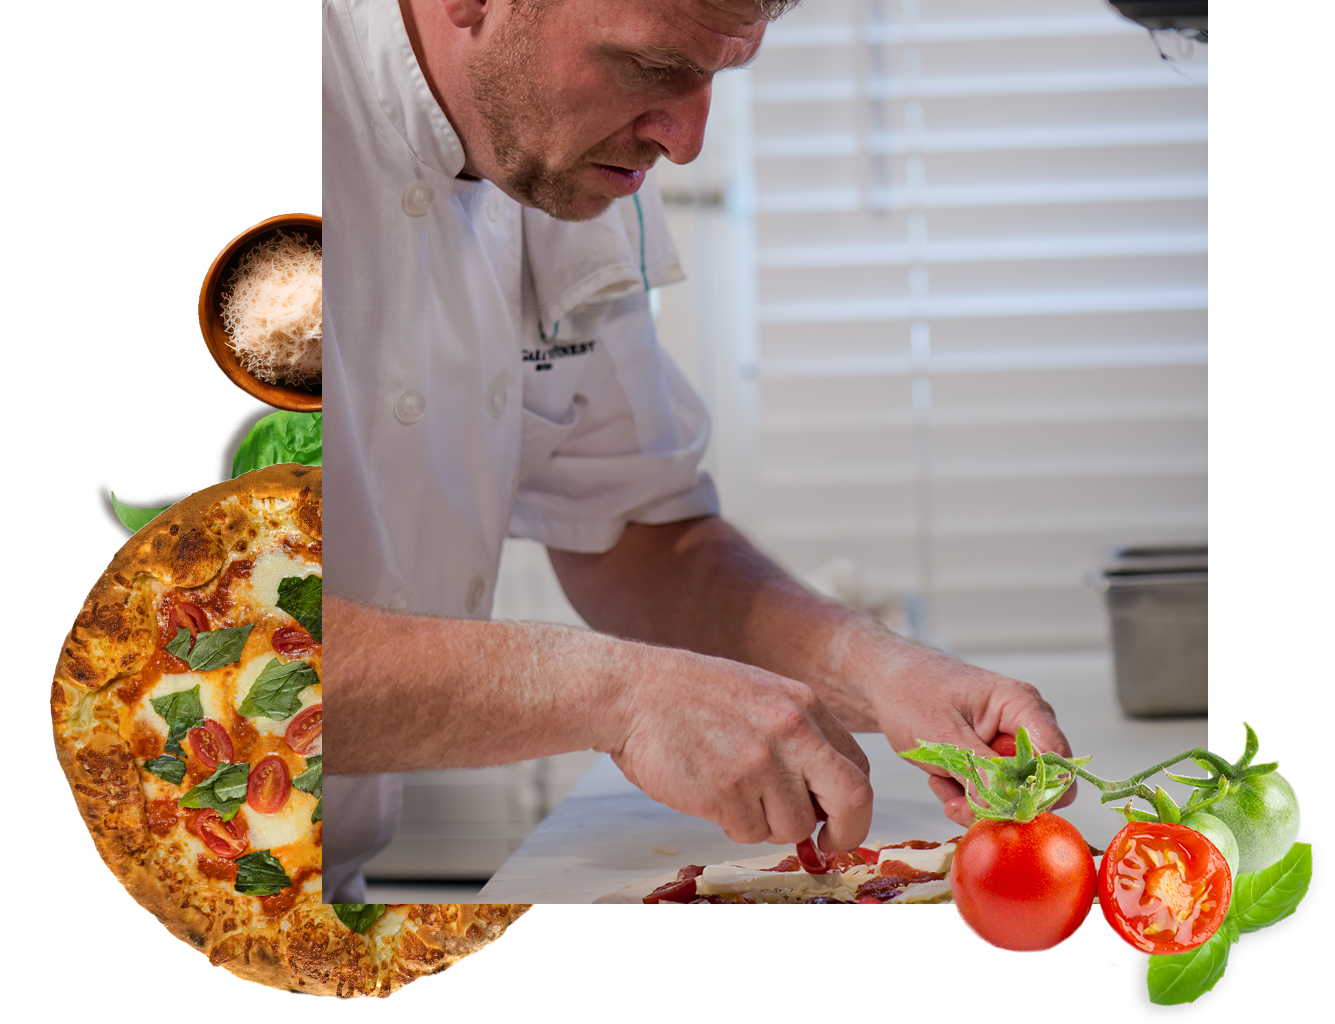 Chef prepping a pizza with pizza ingredients on the side